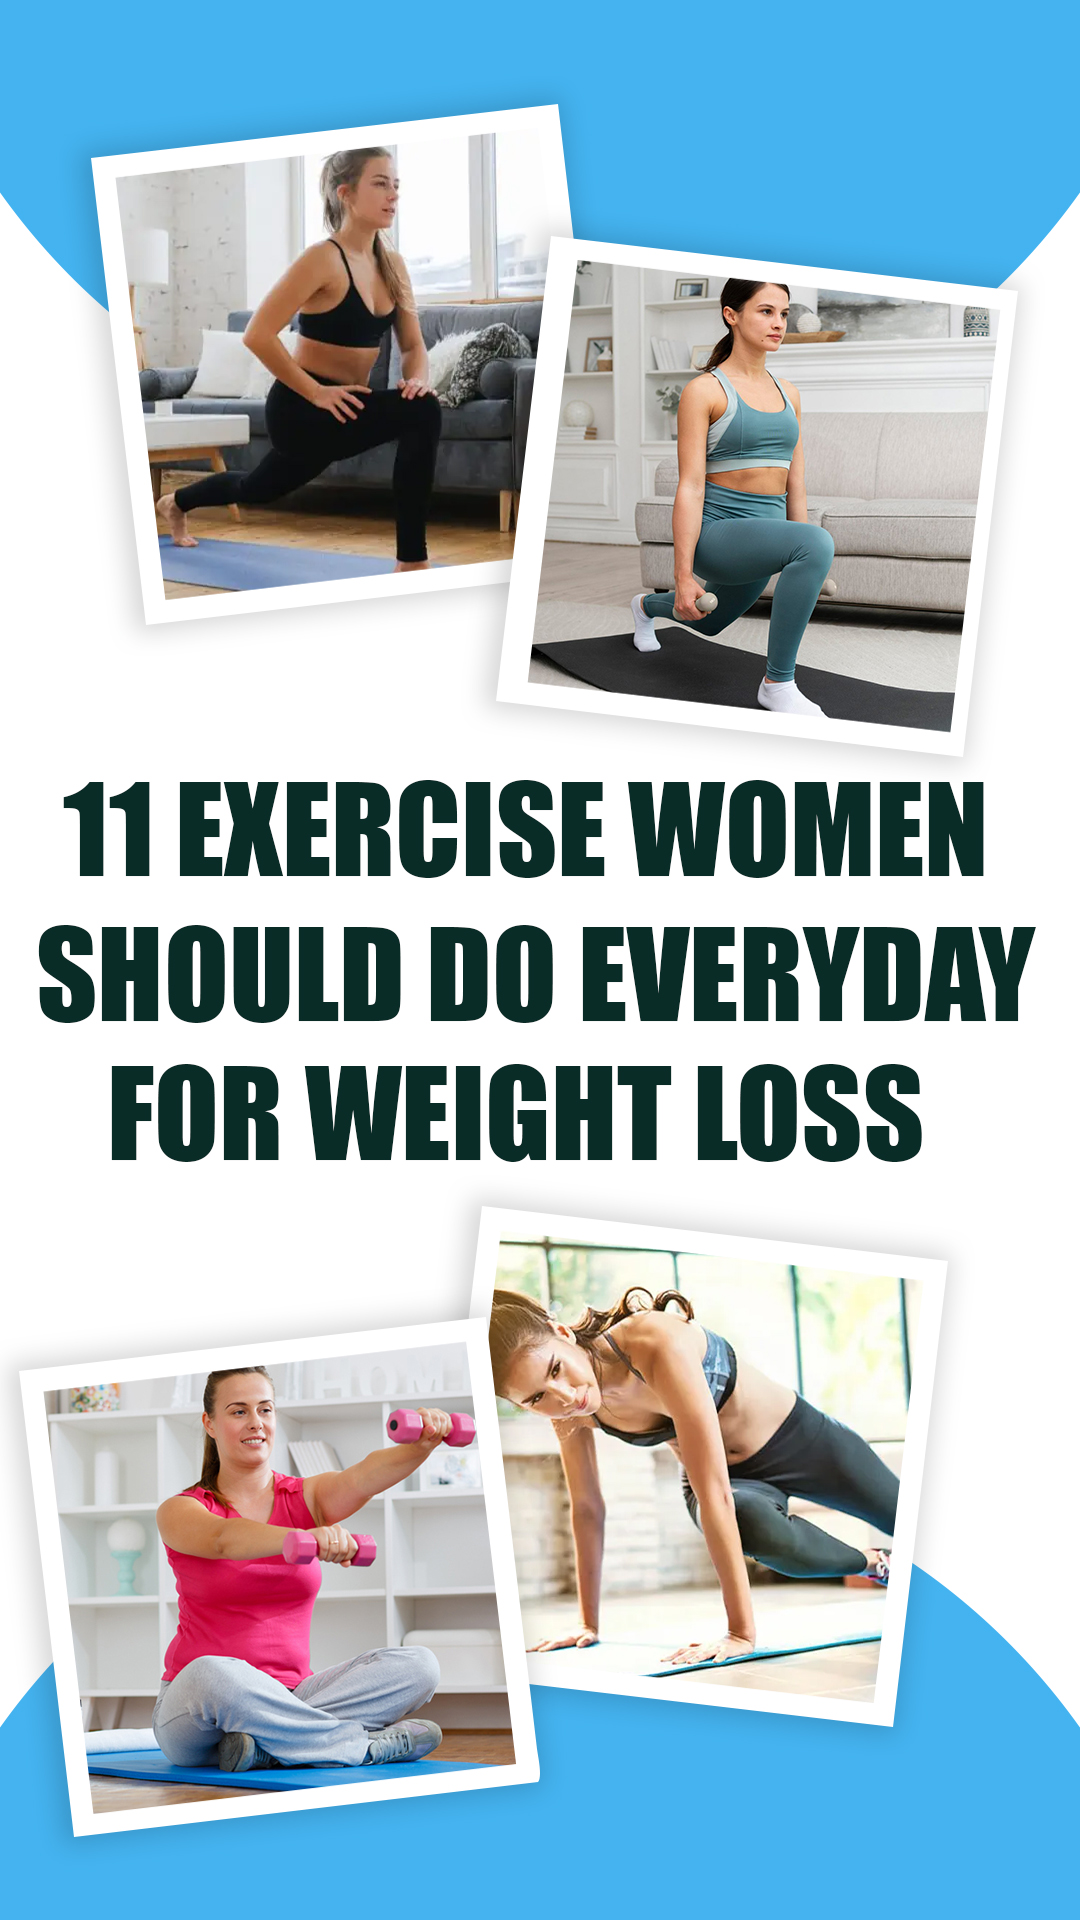 11 Exercises Women Should Do Every Day for Weight Loss